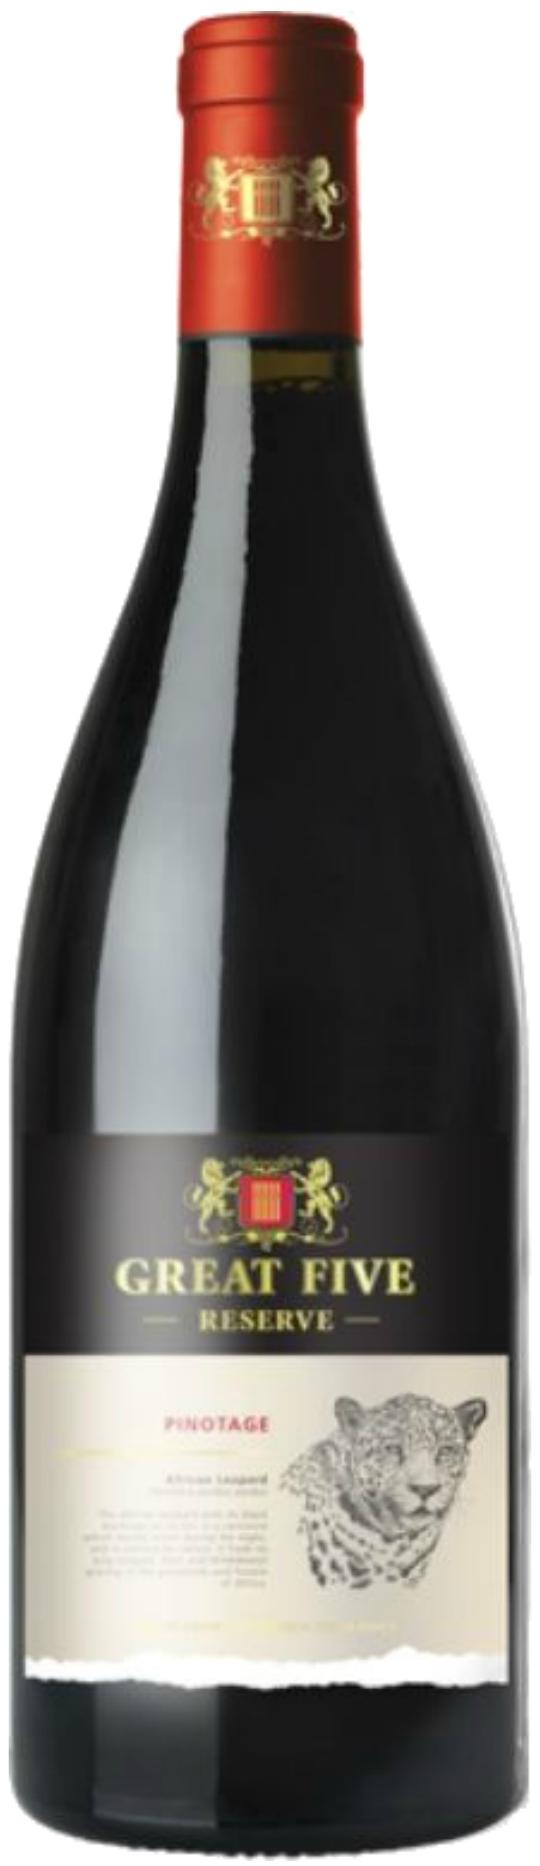 Stellenview Great Five Südafrika, Premium Reserve Pinotage | oHG Wines (Rotwein, Curry Cape) Western